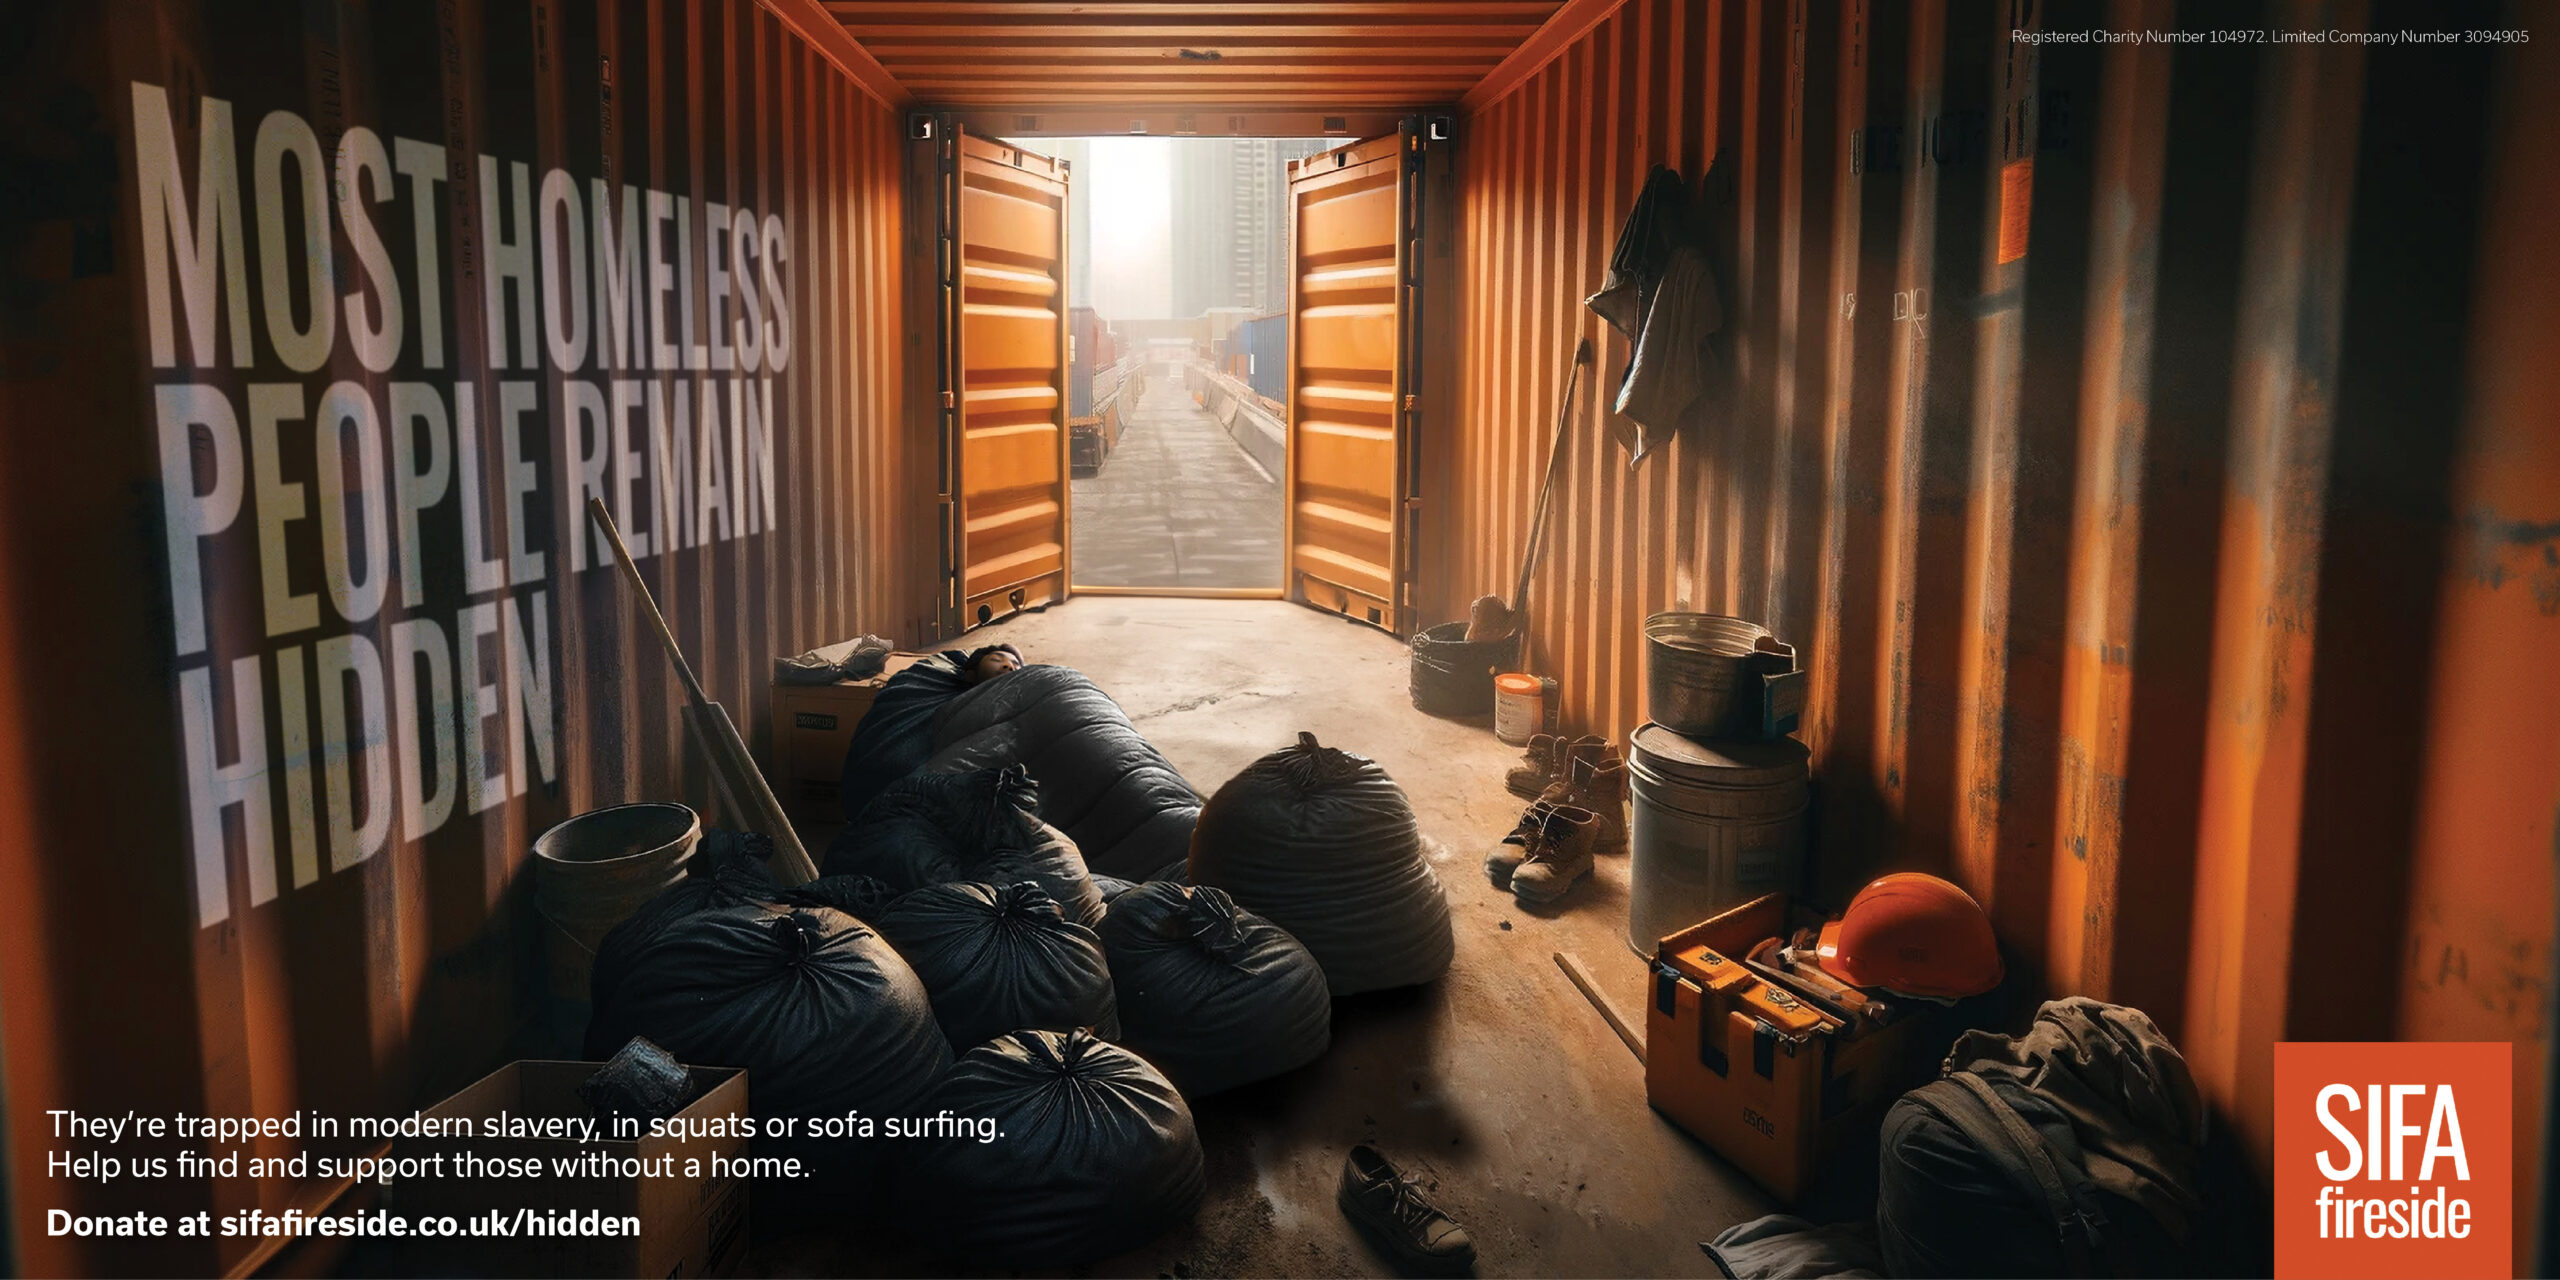 Eye-Catching Campaign Shines a Spotlight on Hidden Homelessness